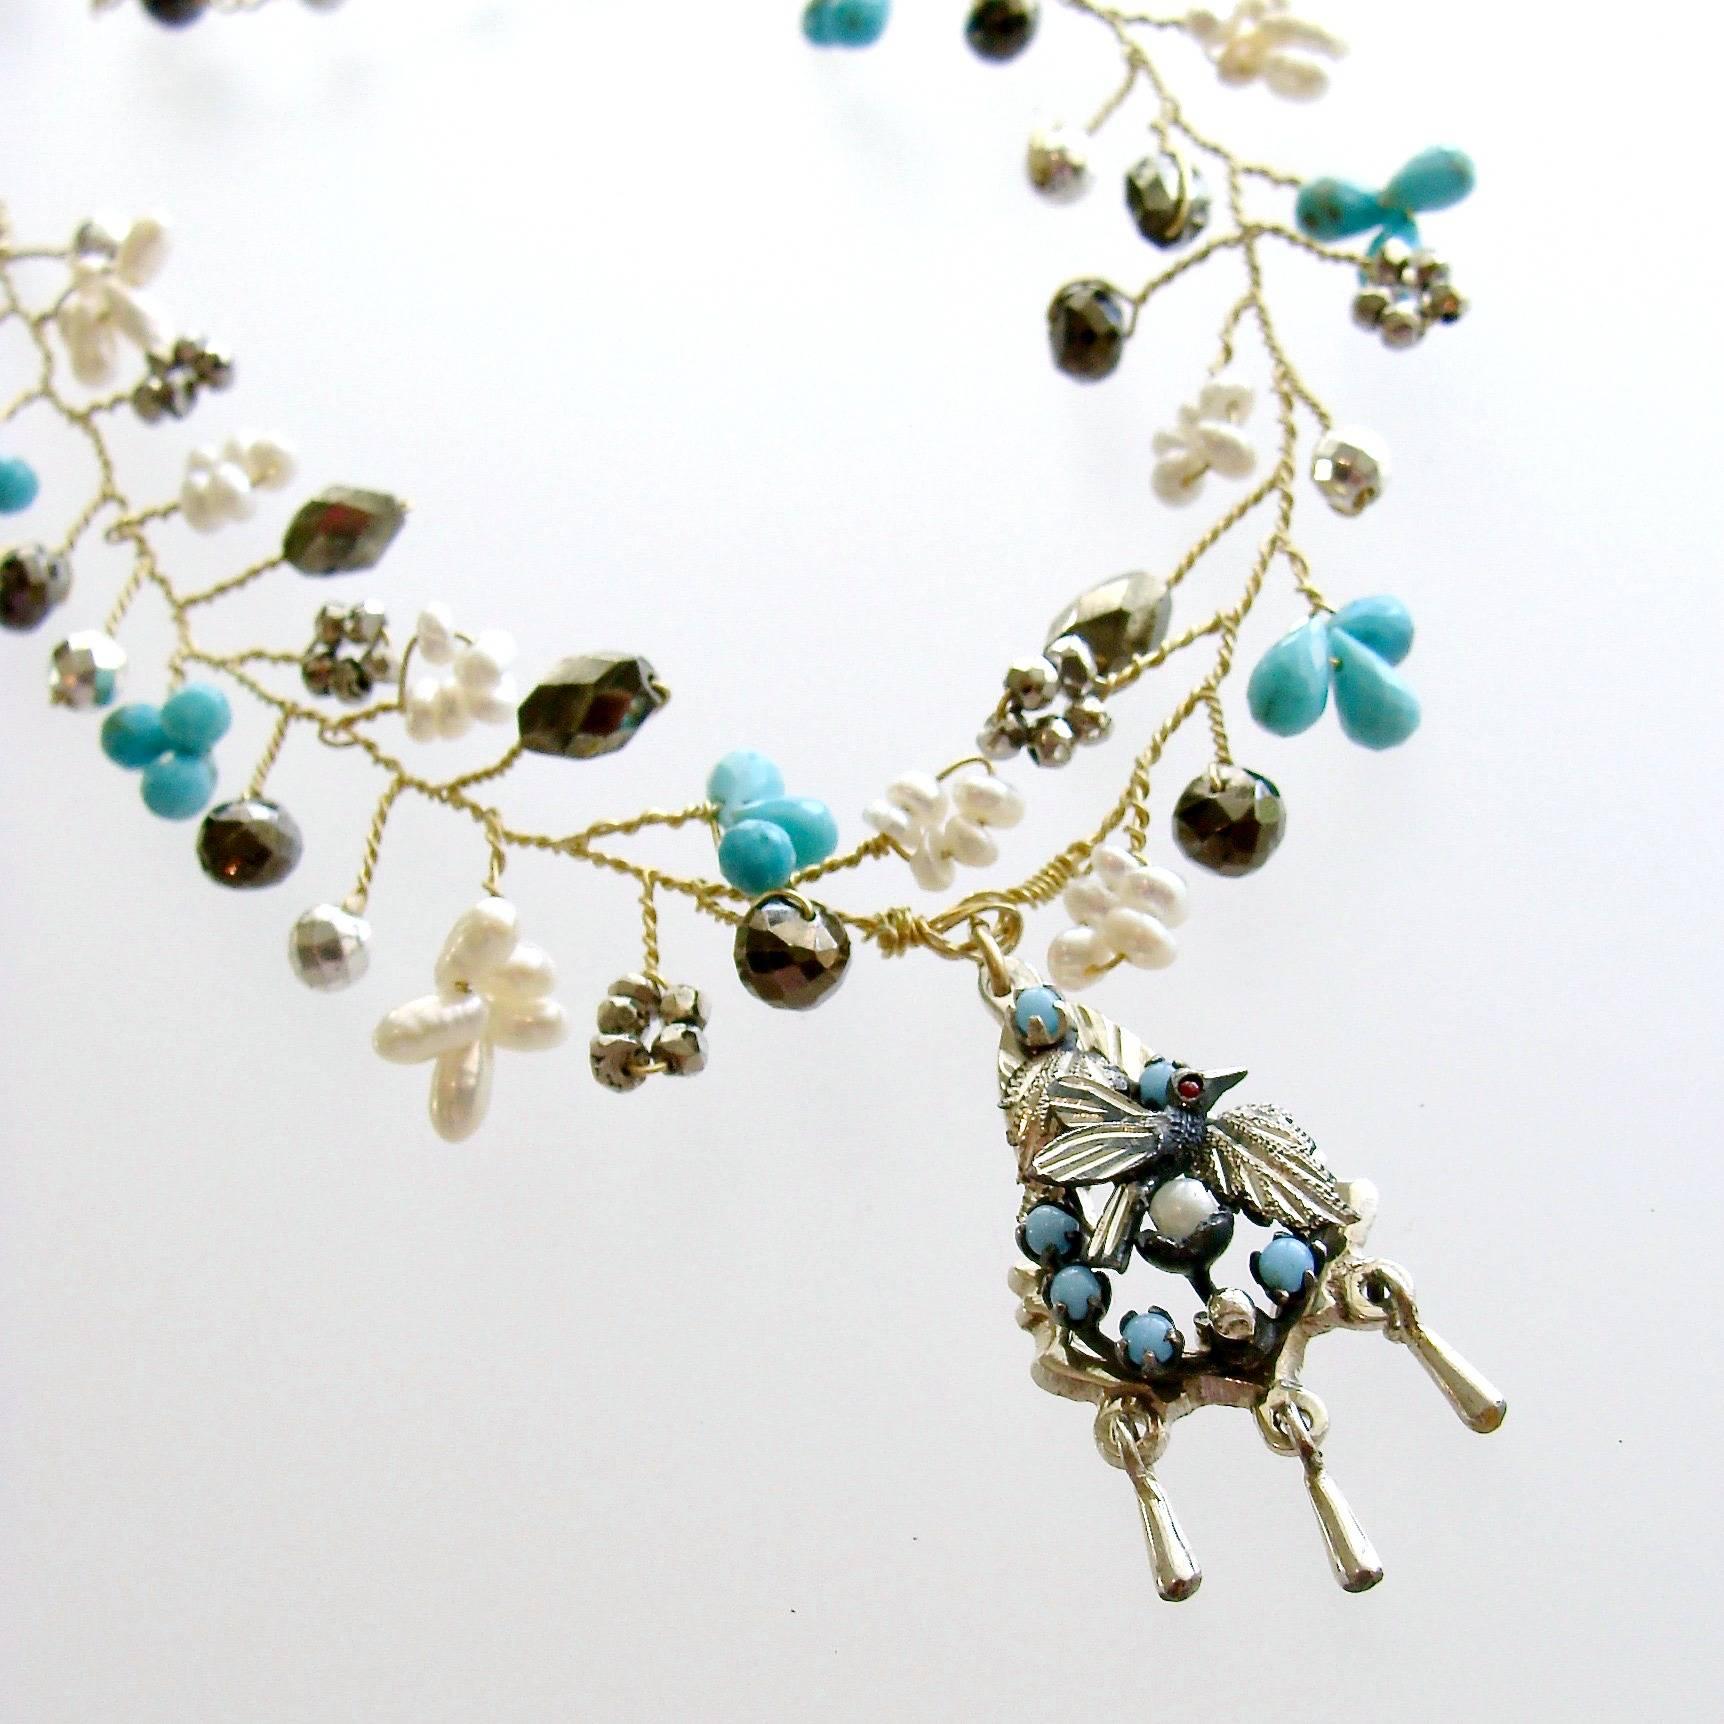 Pajaritos Flora Necklace.

A charming necklace with hand spun beads of micro turquoise teardrops and pearls, silver and natural pyrite - has been designed to replicate the flora and fauna of a woodland scene.  The mix of metals consisting of